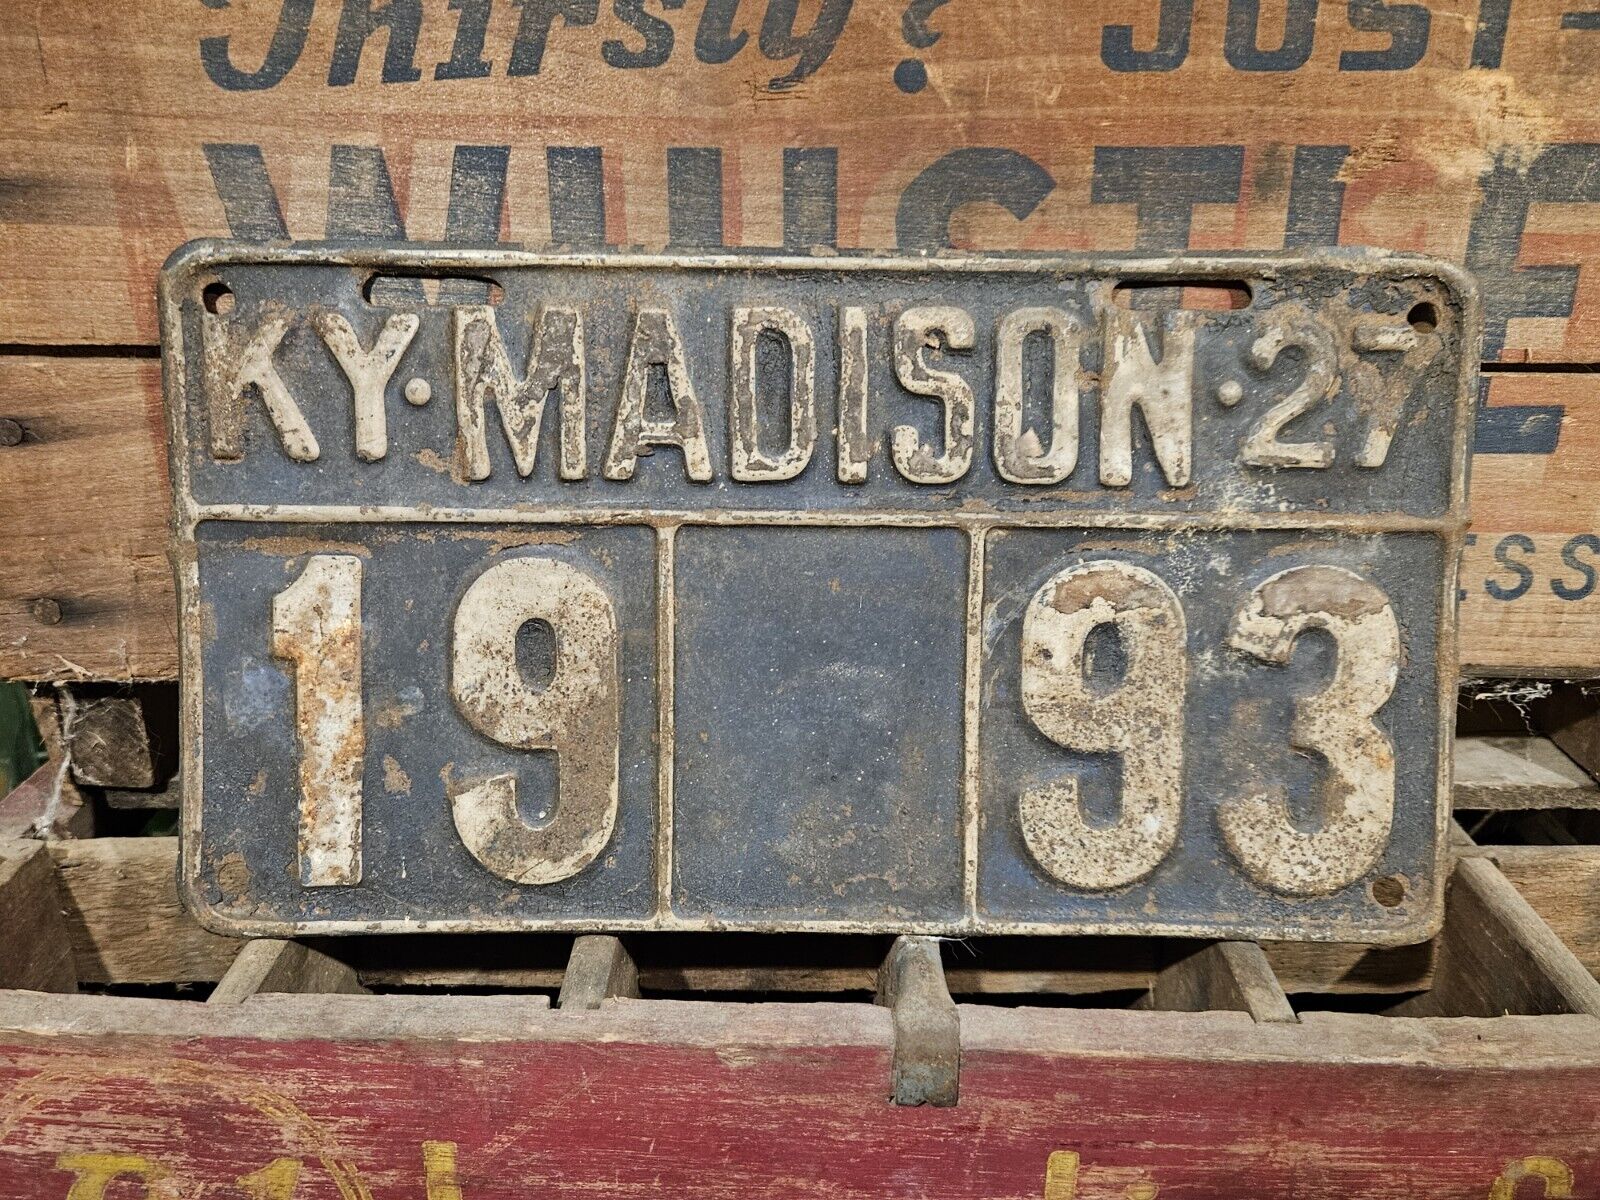 1927 Madison County Kentucky License Plate 1993 19 93